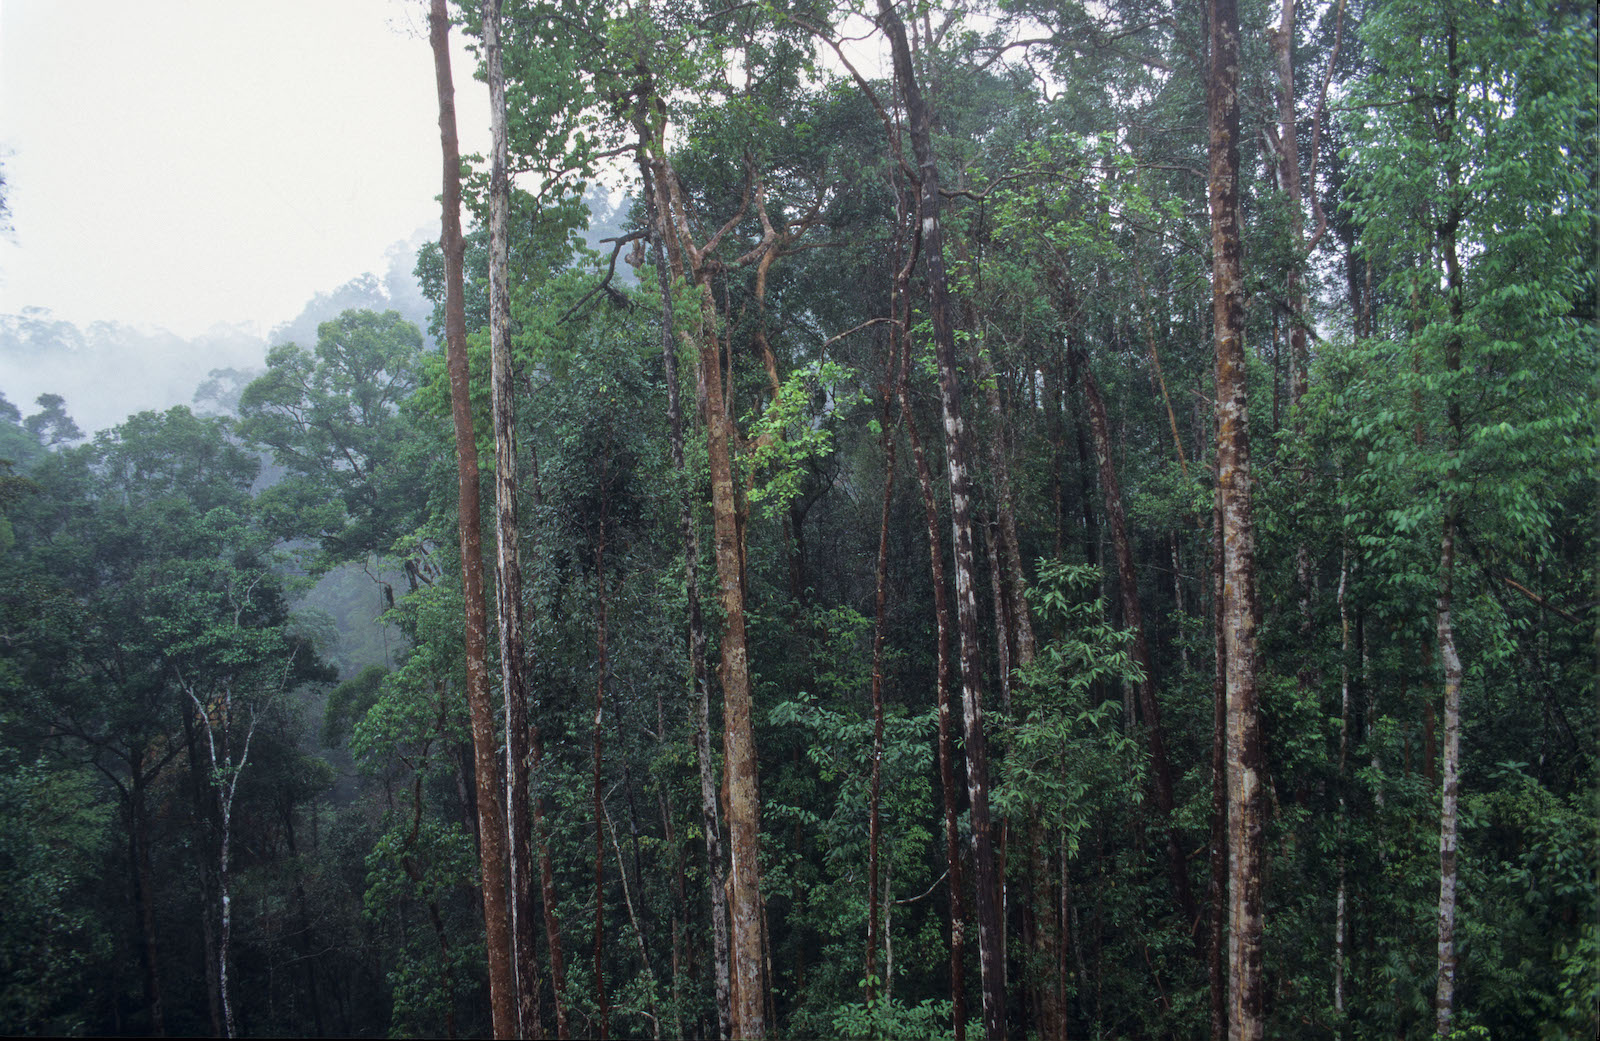 Trees in a rainforest